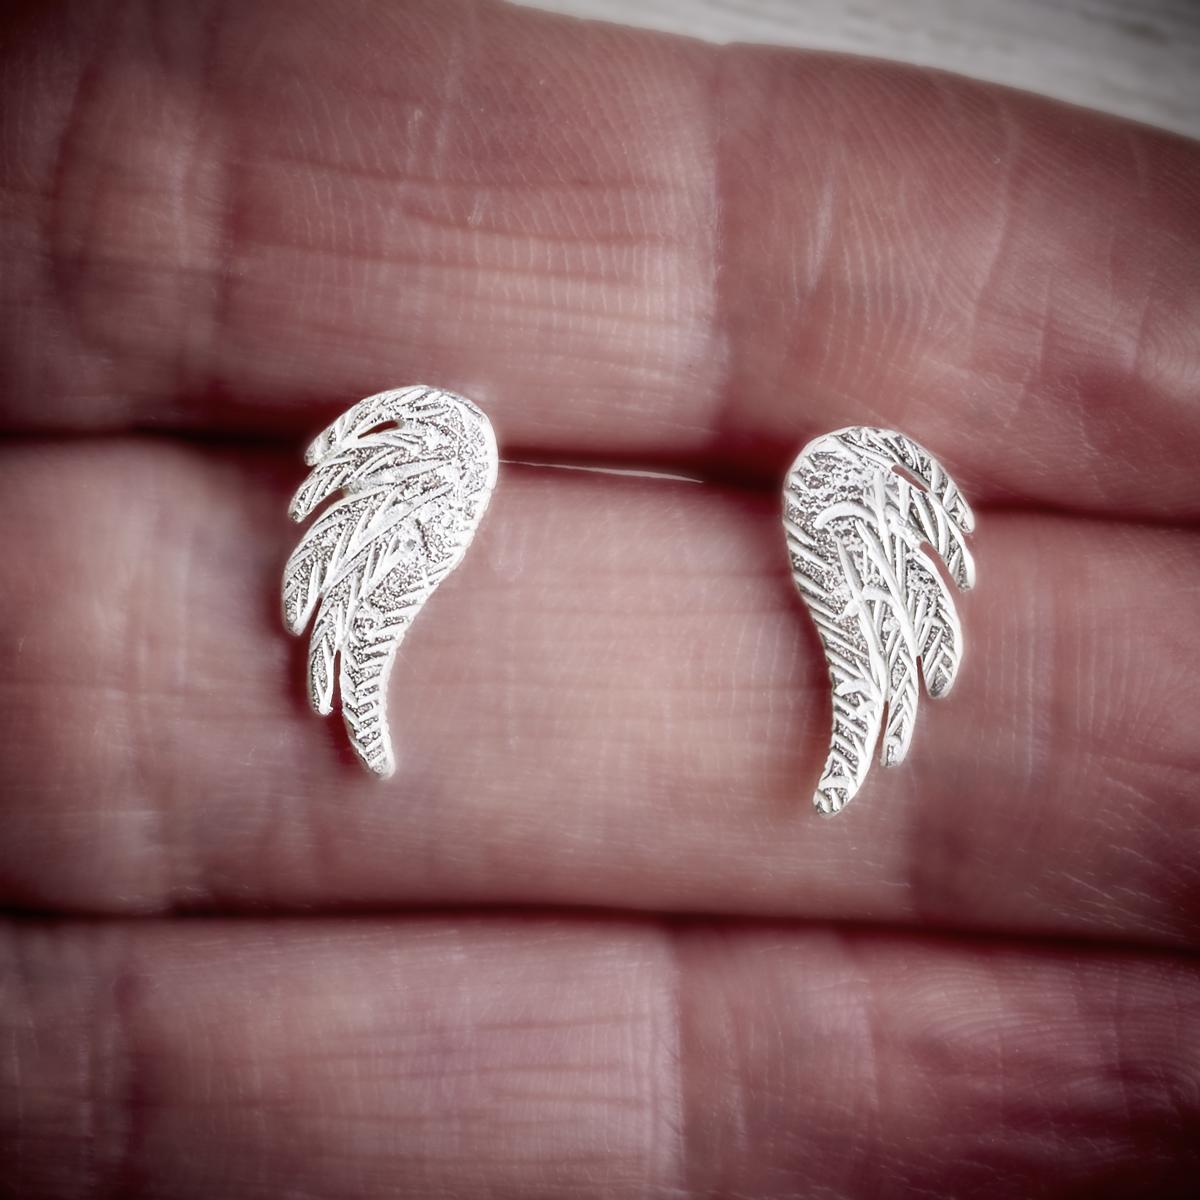 small silver angel wing stud earrings by Fi Mehra available from THE JEWELLERY MAKERS, image property of EMMA WHITE-2